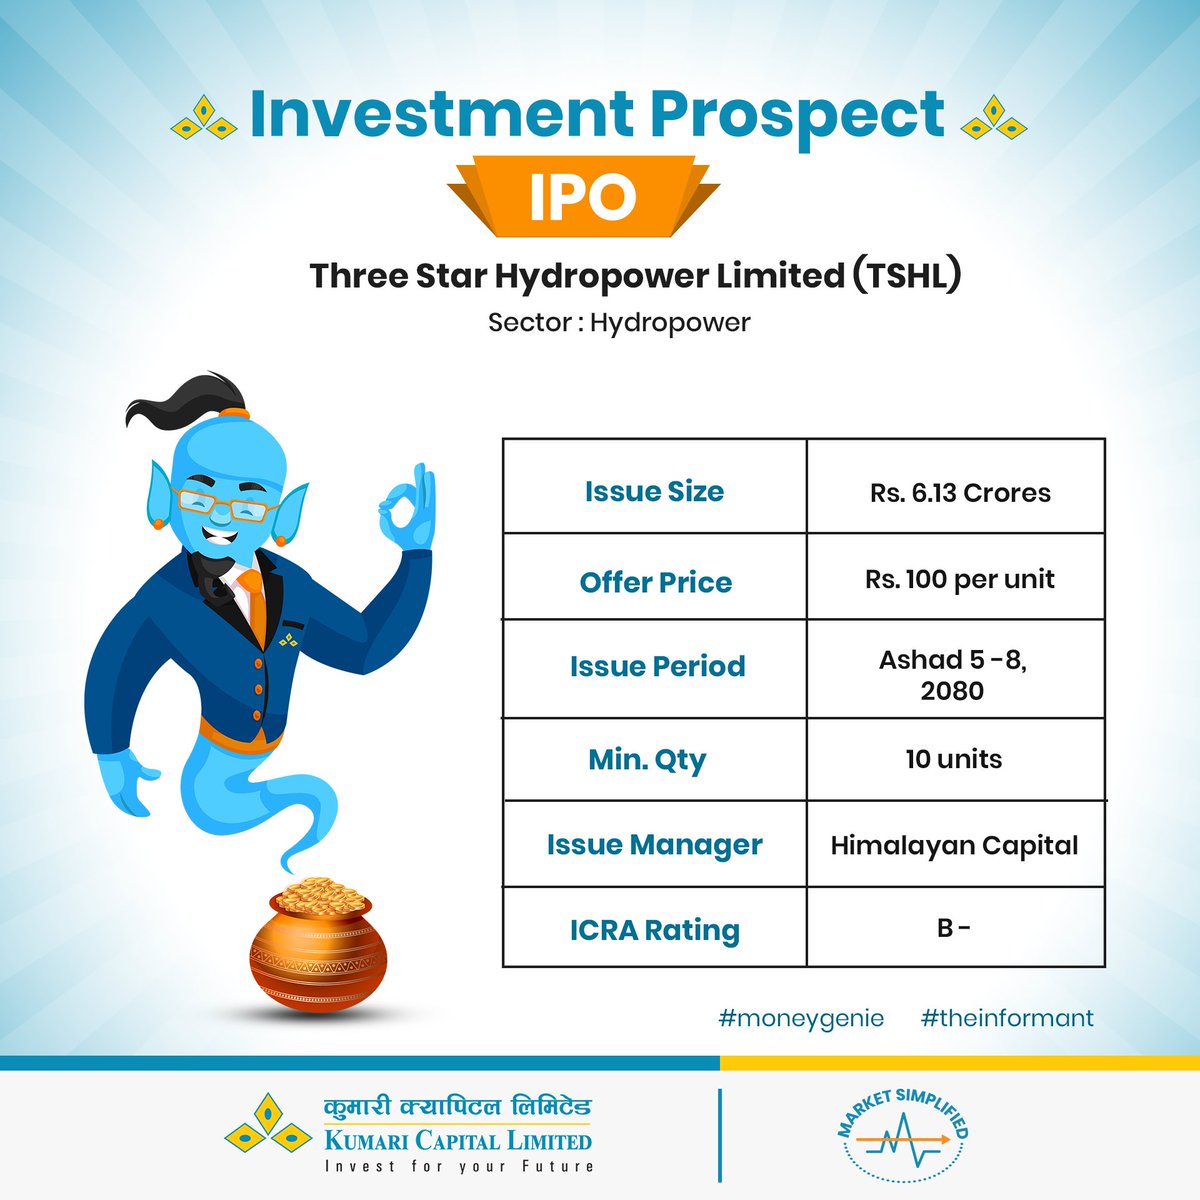 Investment Prospect: IPO Alert!!!

IPO of Three Star Hydropower Limited (TSHL) has been opened for applications to general public from today, June 20 to 23, 2023. 

**This content is solely intended for informational purposes and should not be construed as a recommendation.